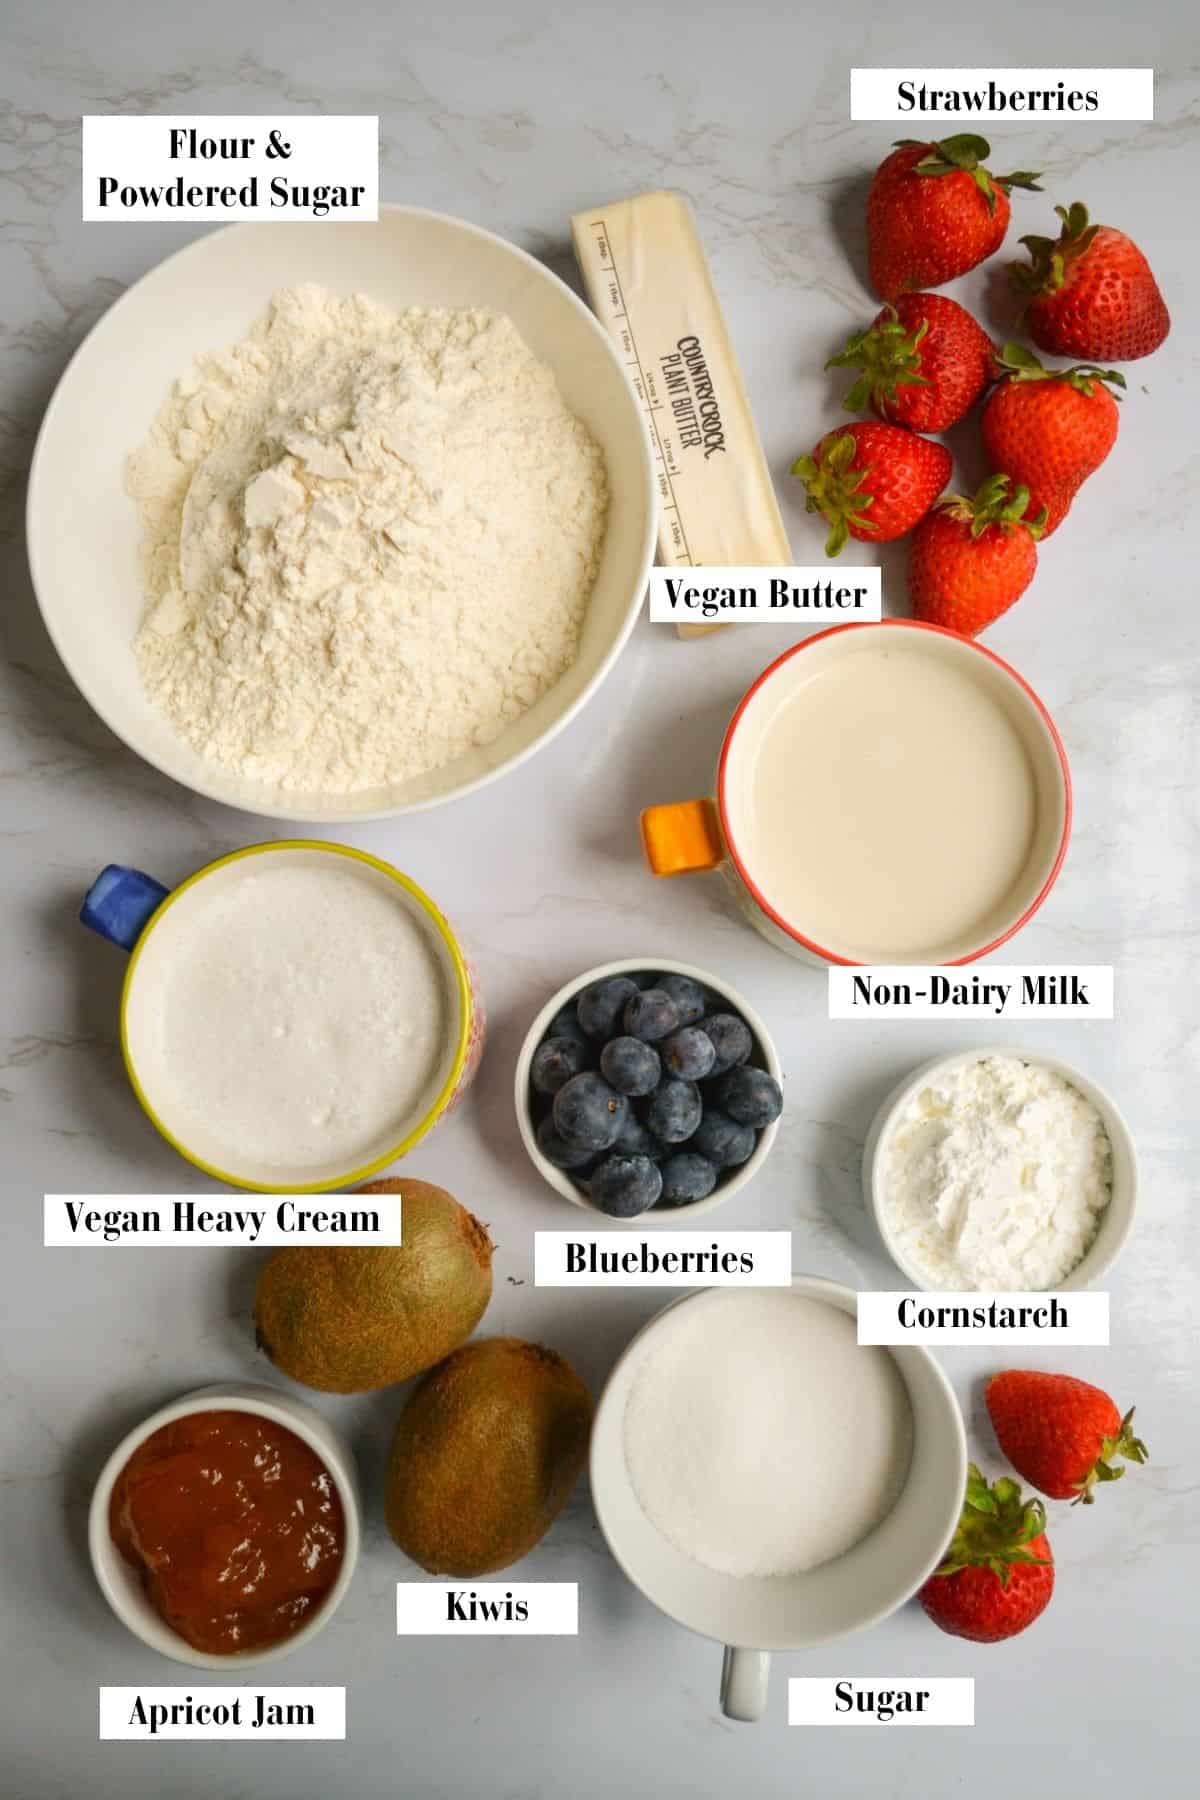 Ingredients for making this recipe in small bowls on a marble surface.